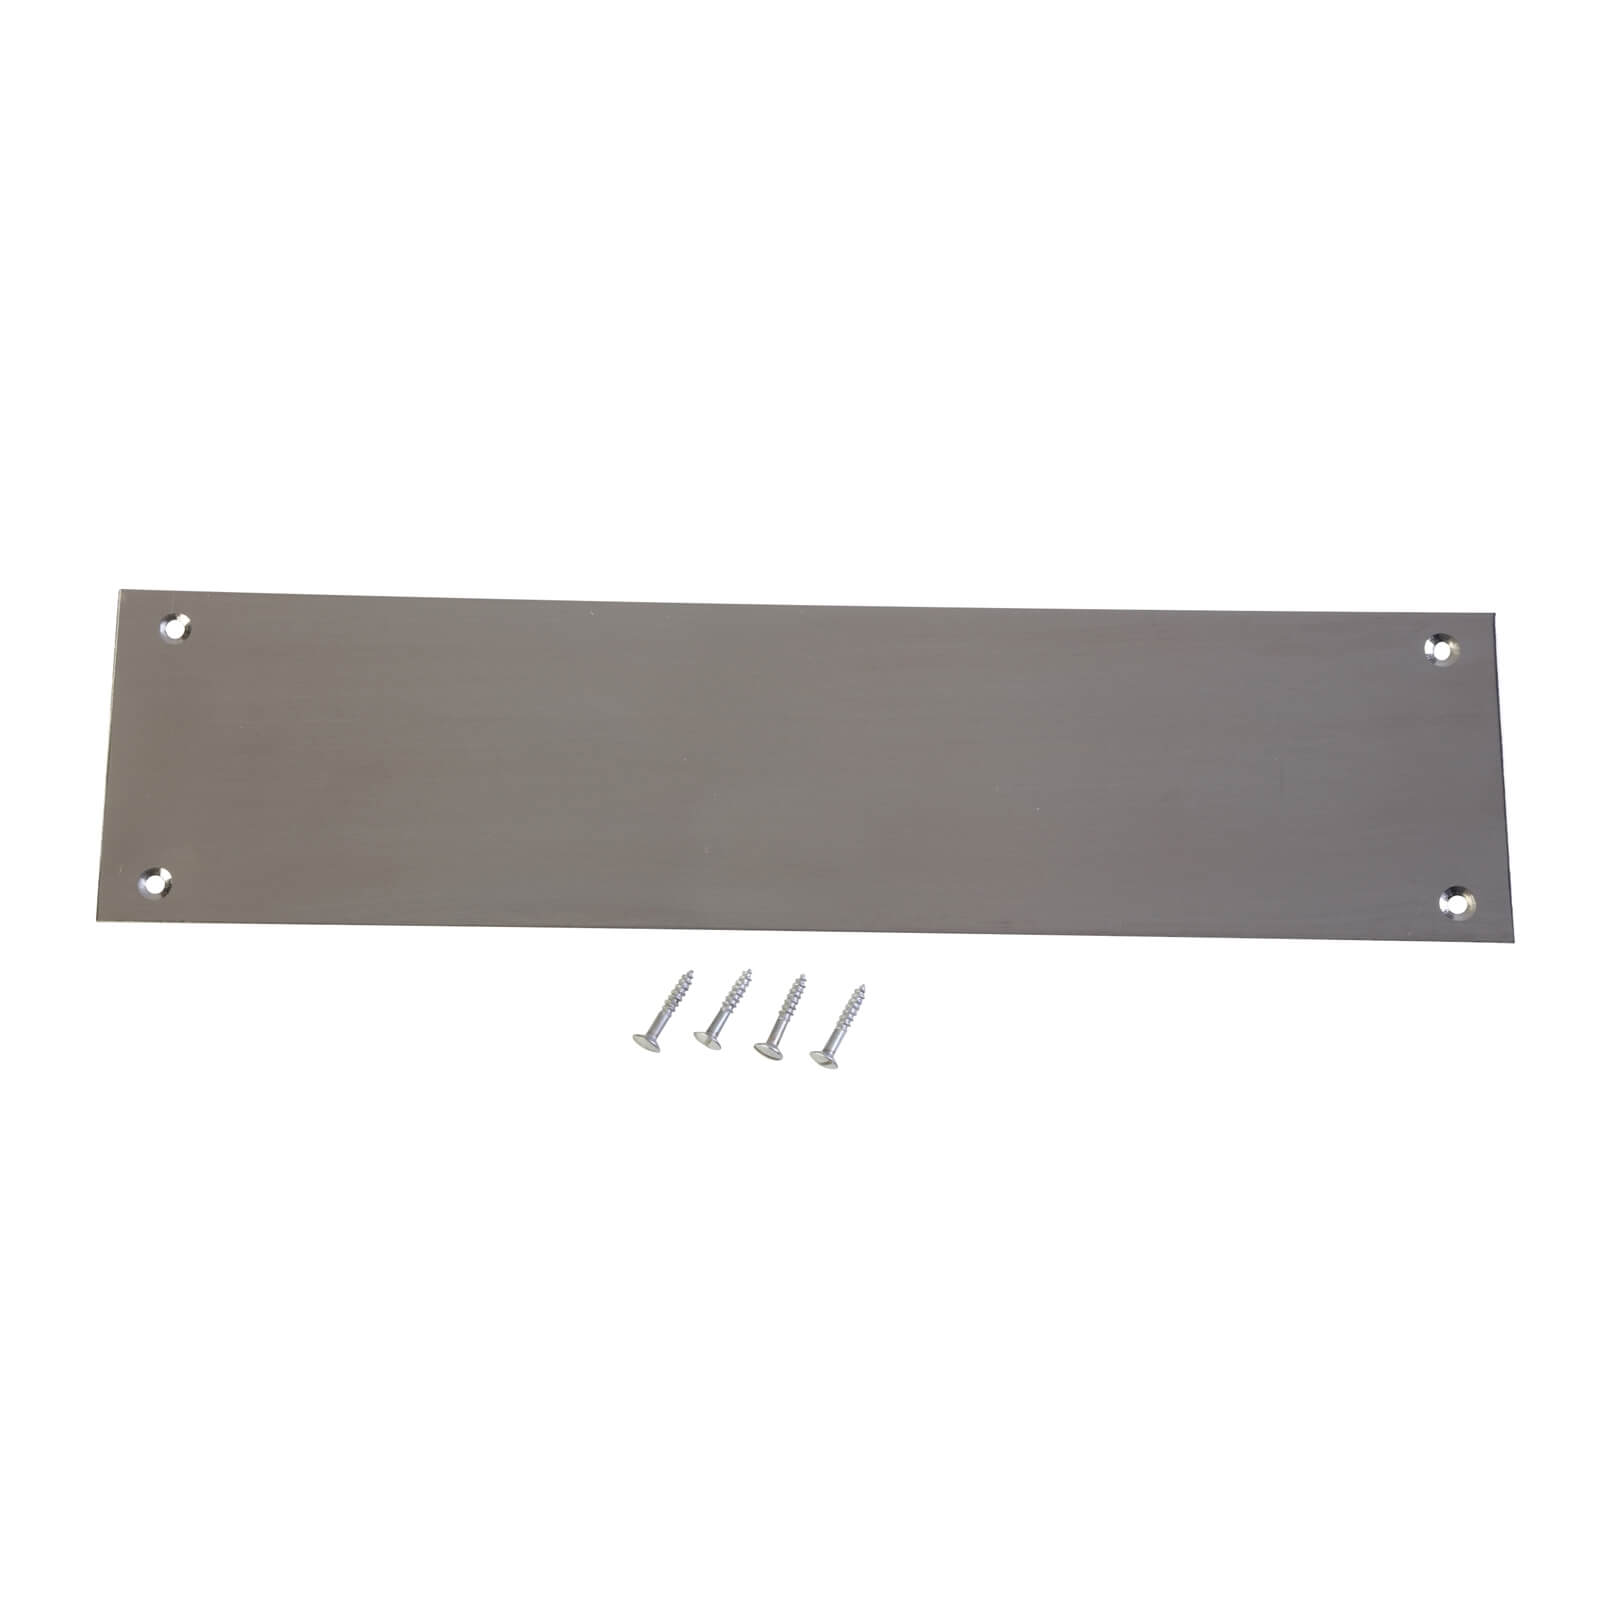 Stainless Steel Push Plate - 300 x 75mm